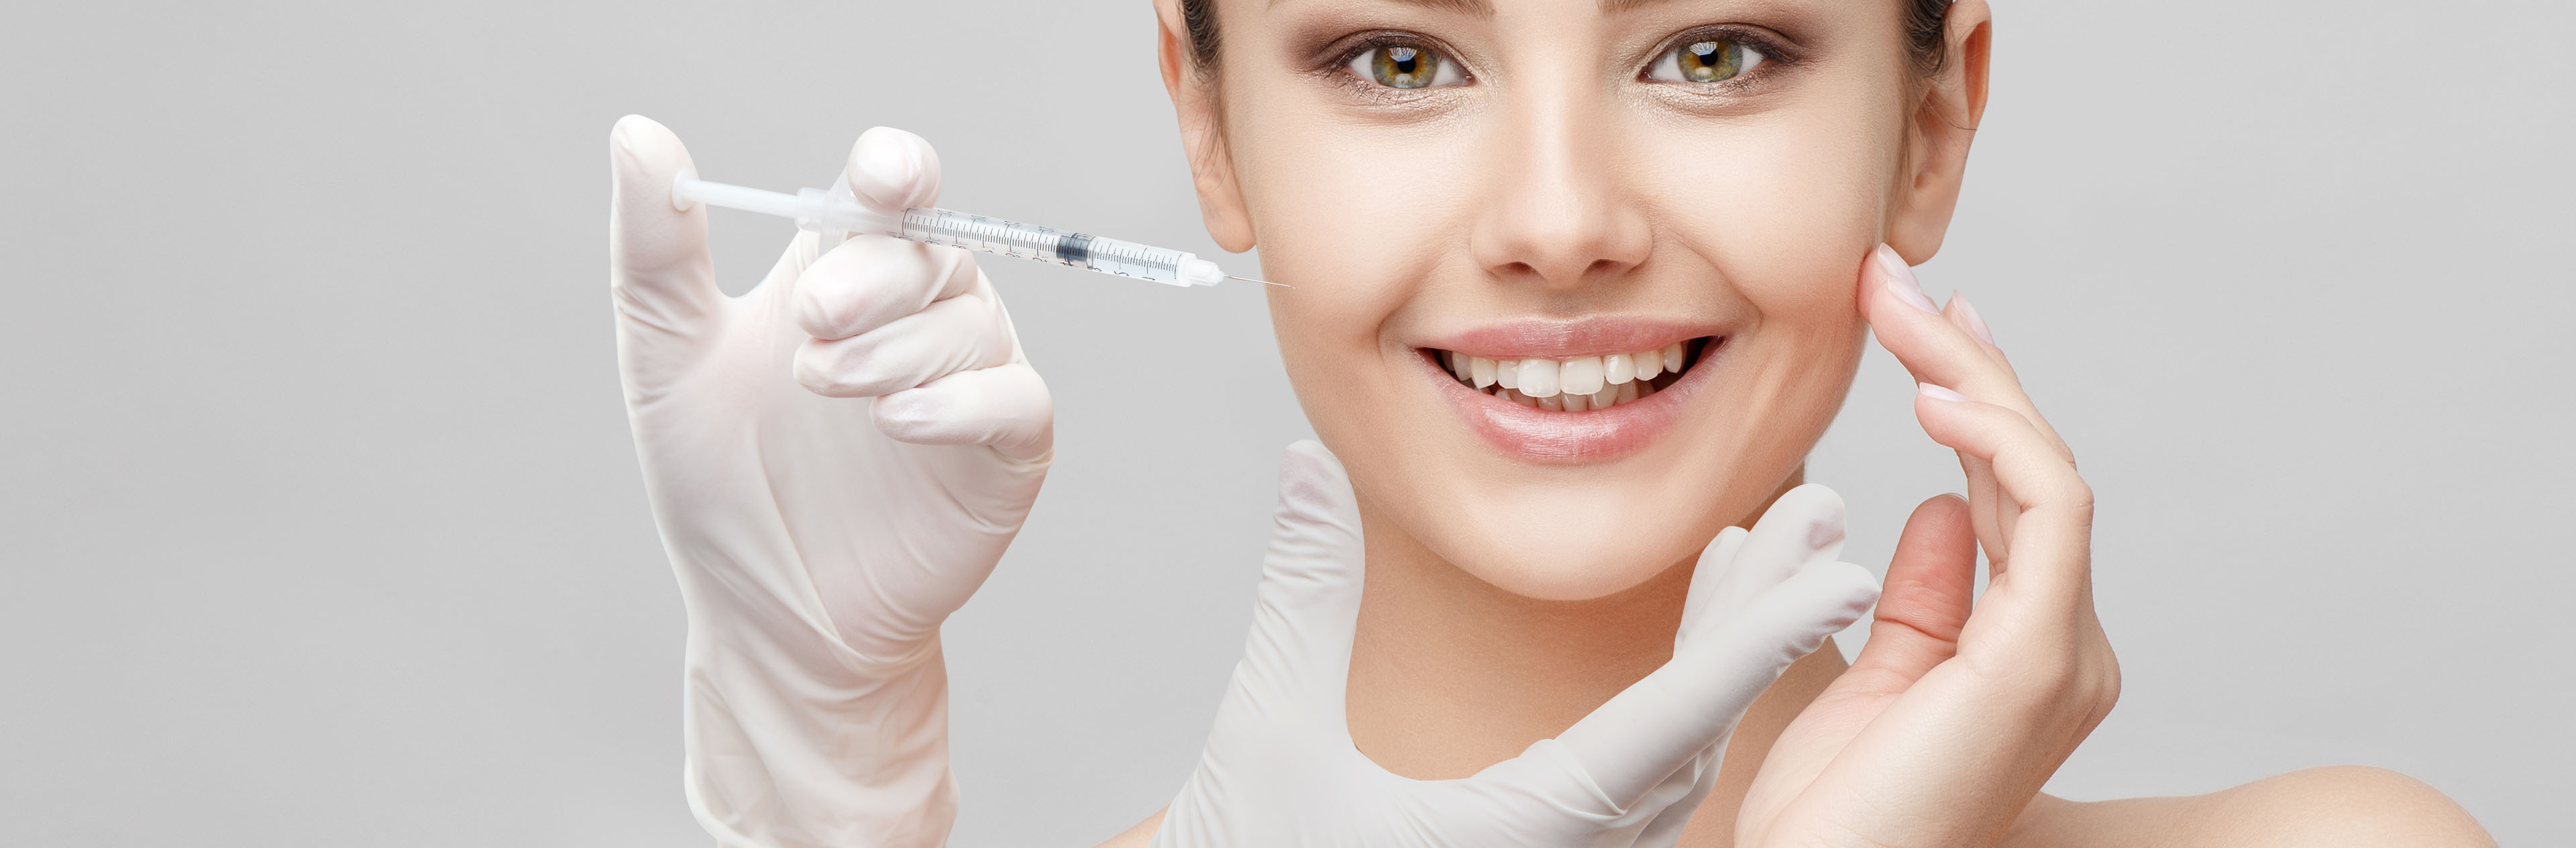 Facelift vs. Injected Dermal Fillers: Which to Choose and Why 